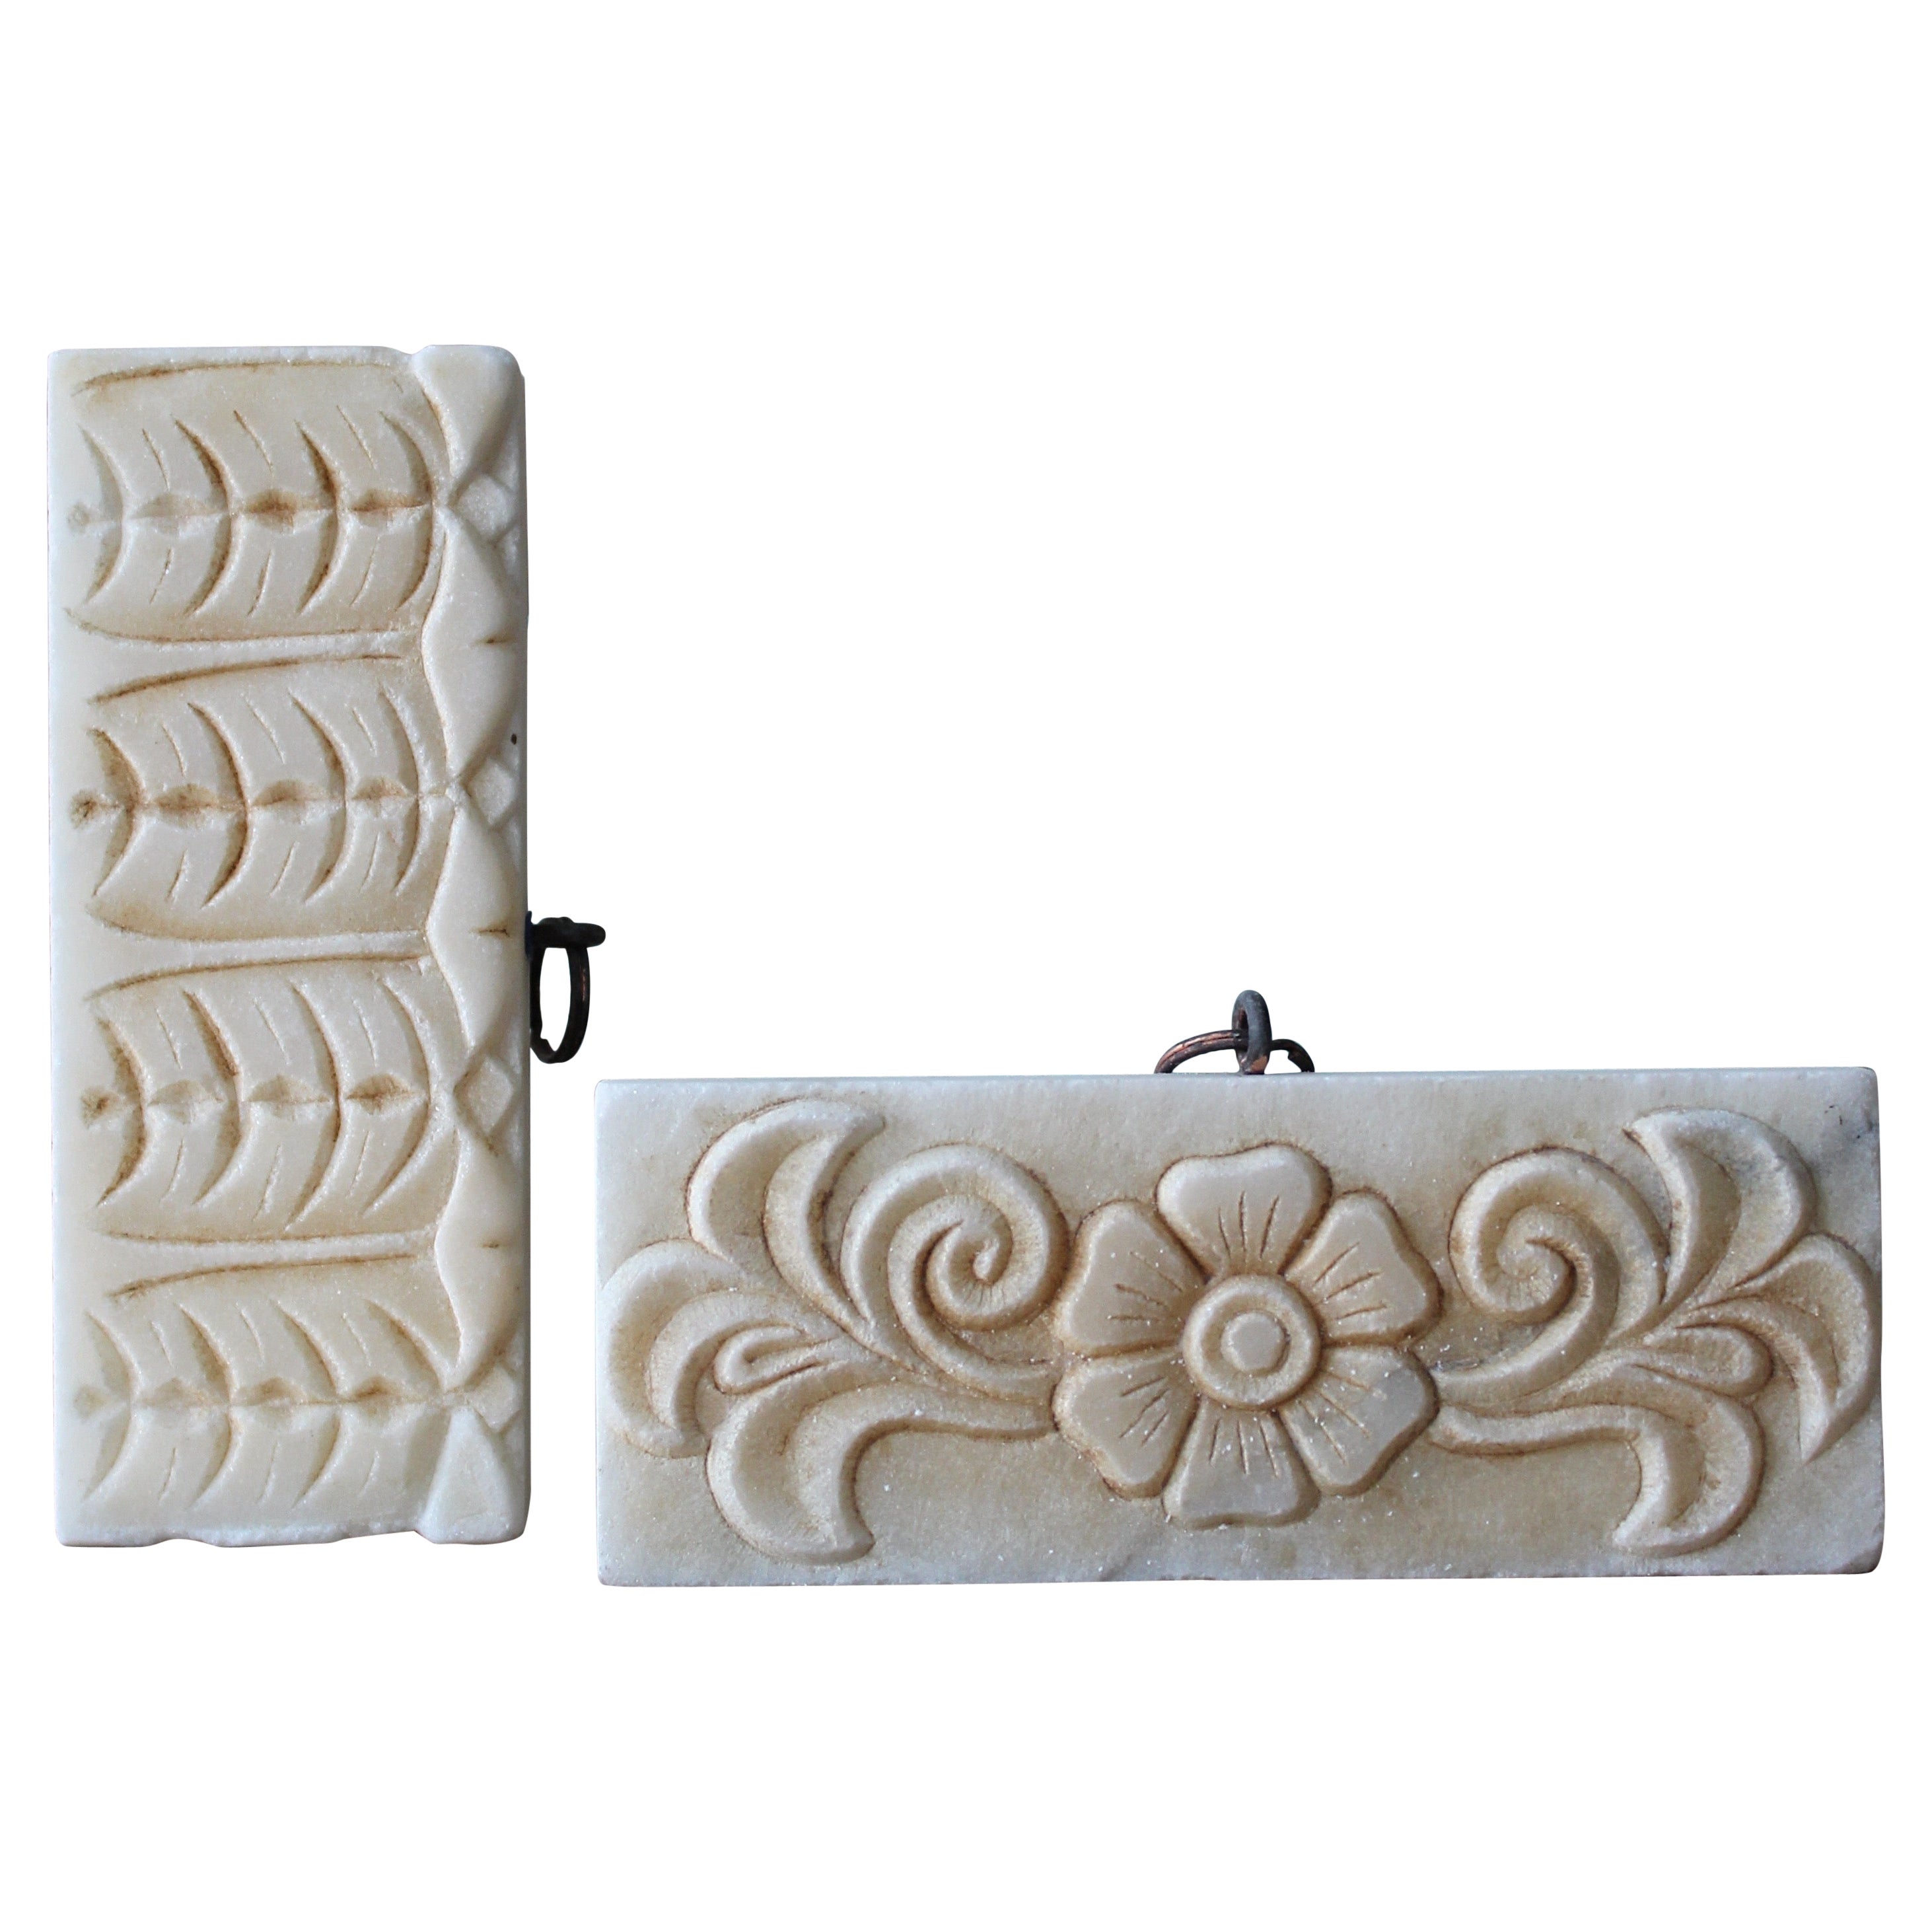 Early 20th Century Pair of Marble Architectural Decorative Elements